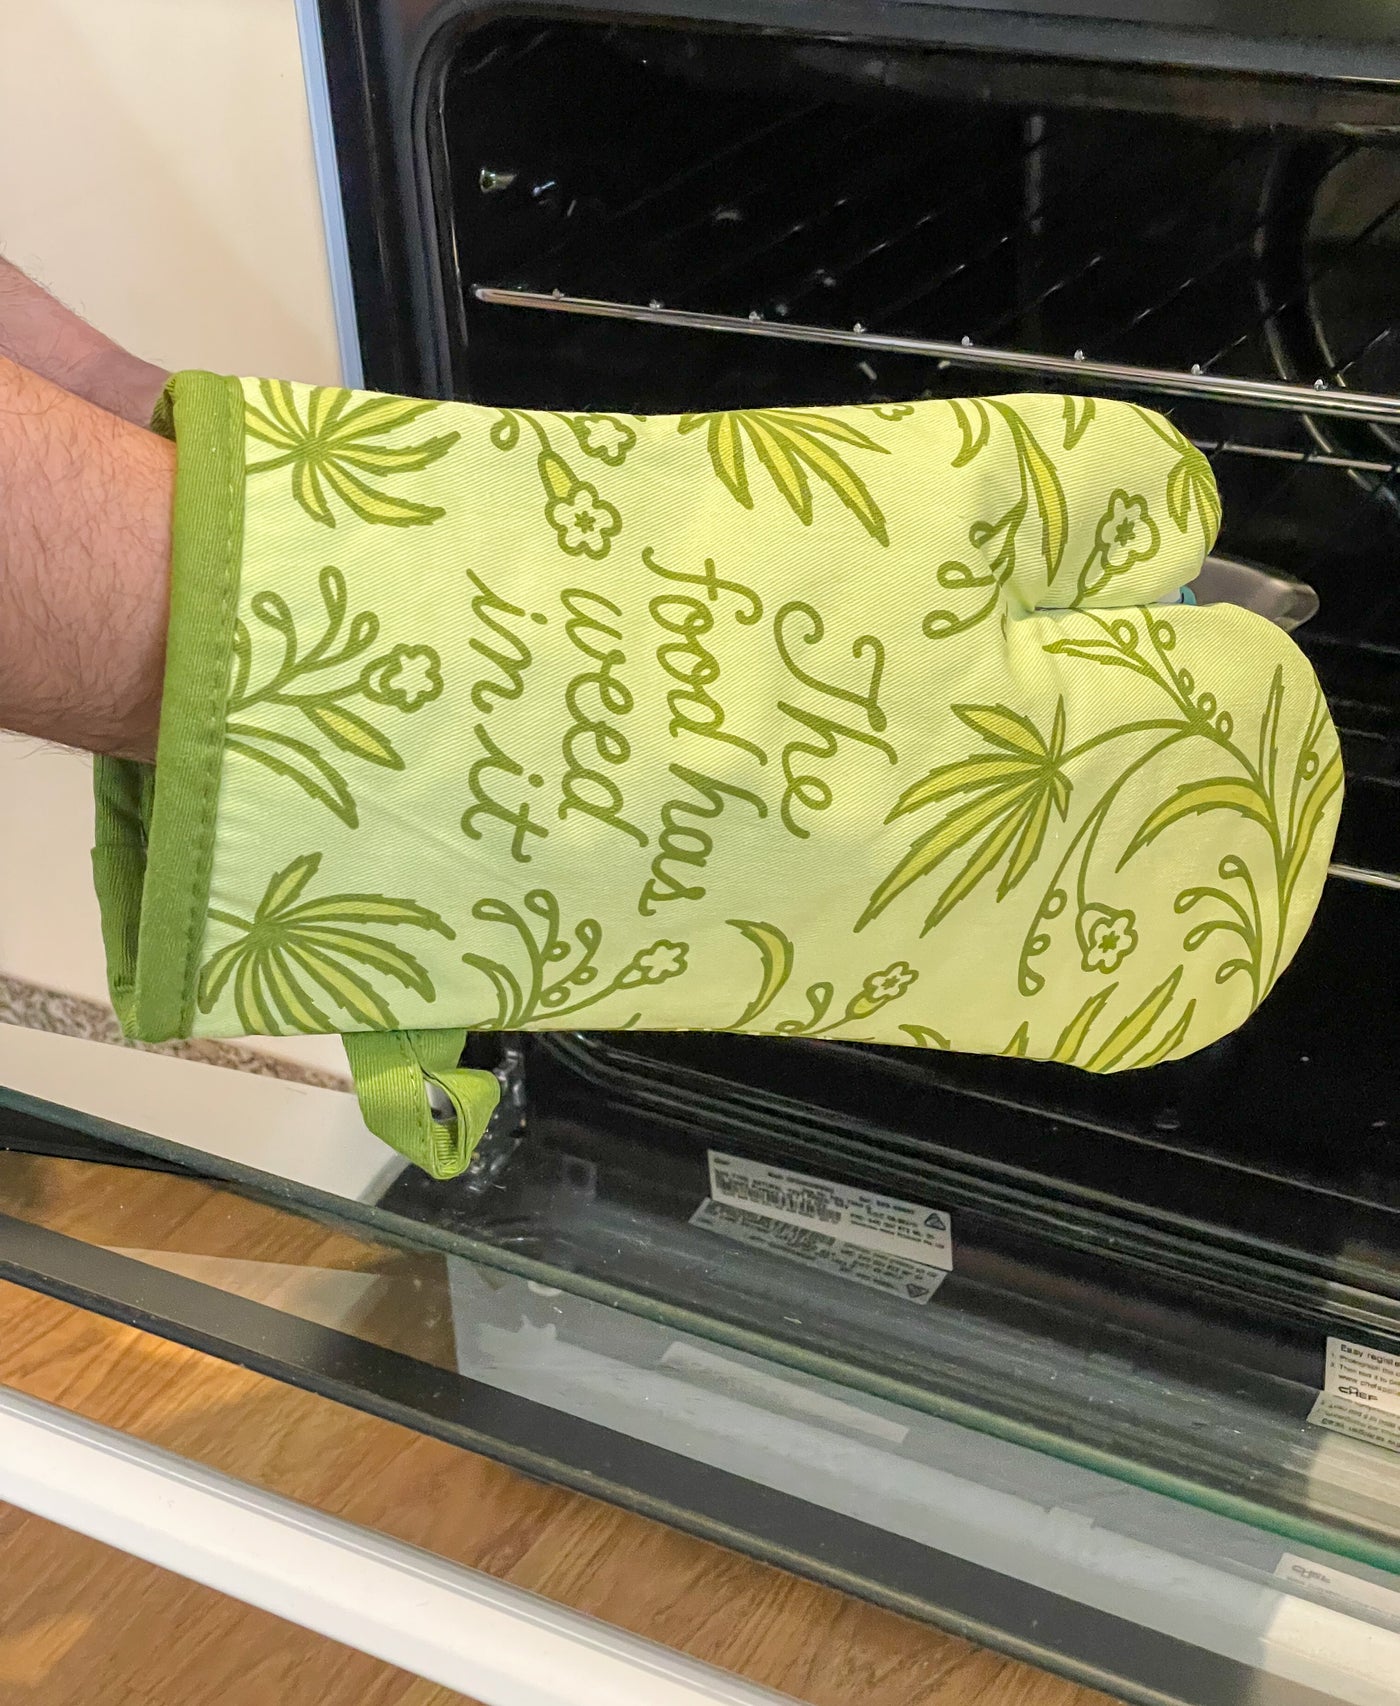 Blue Q - The Food Has Weed In It Oven Mitt 